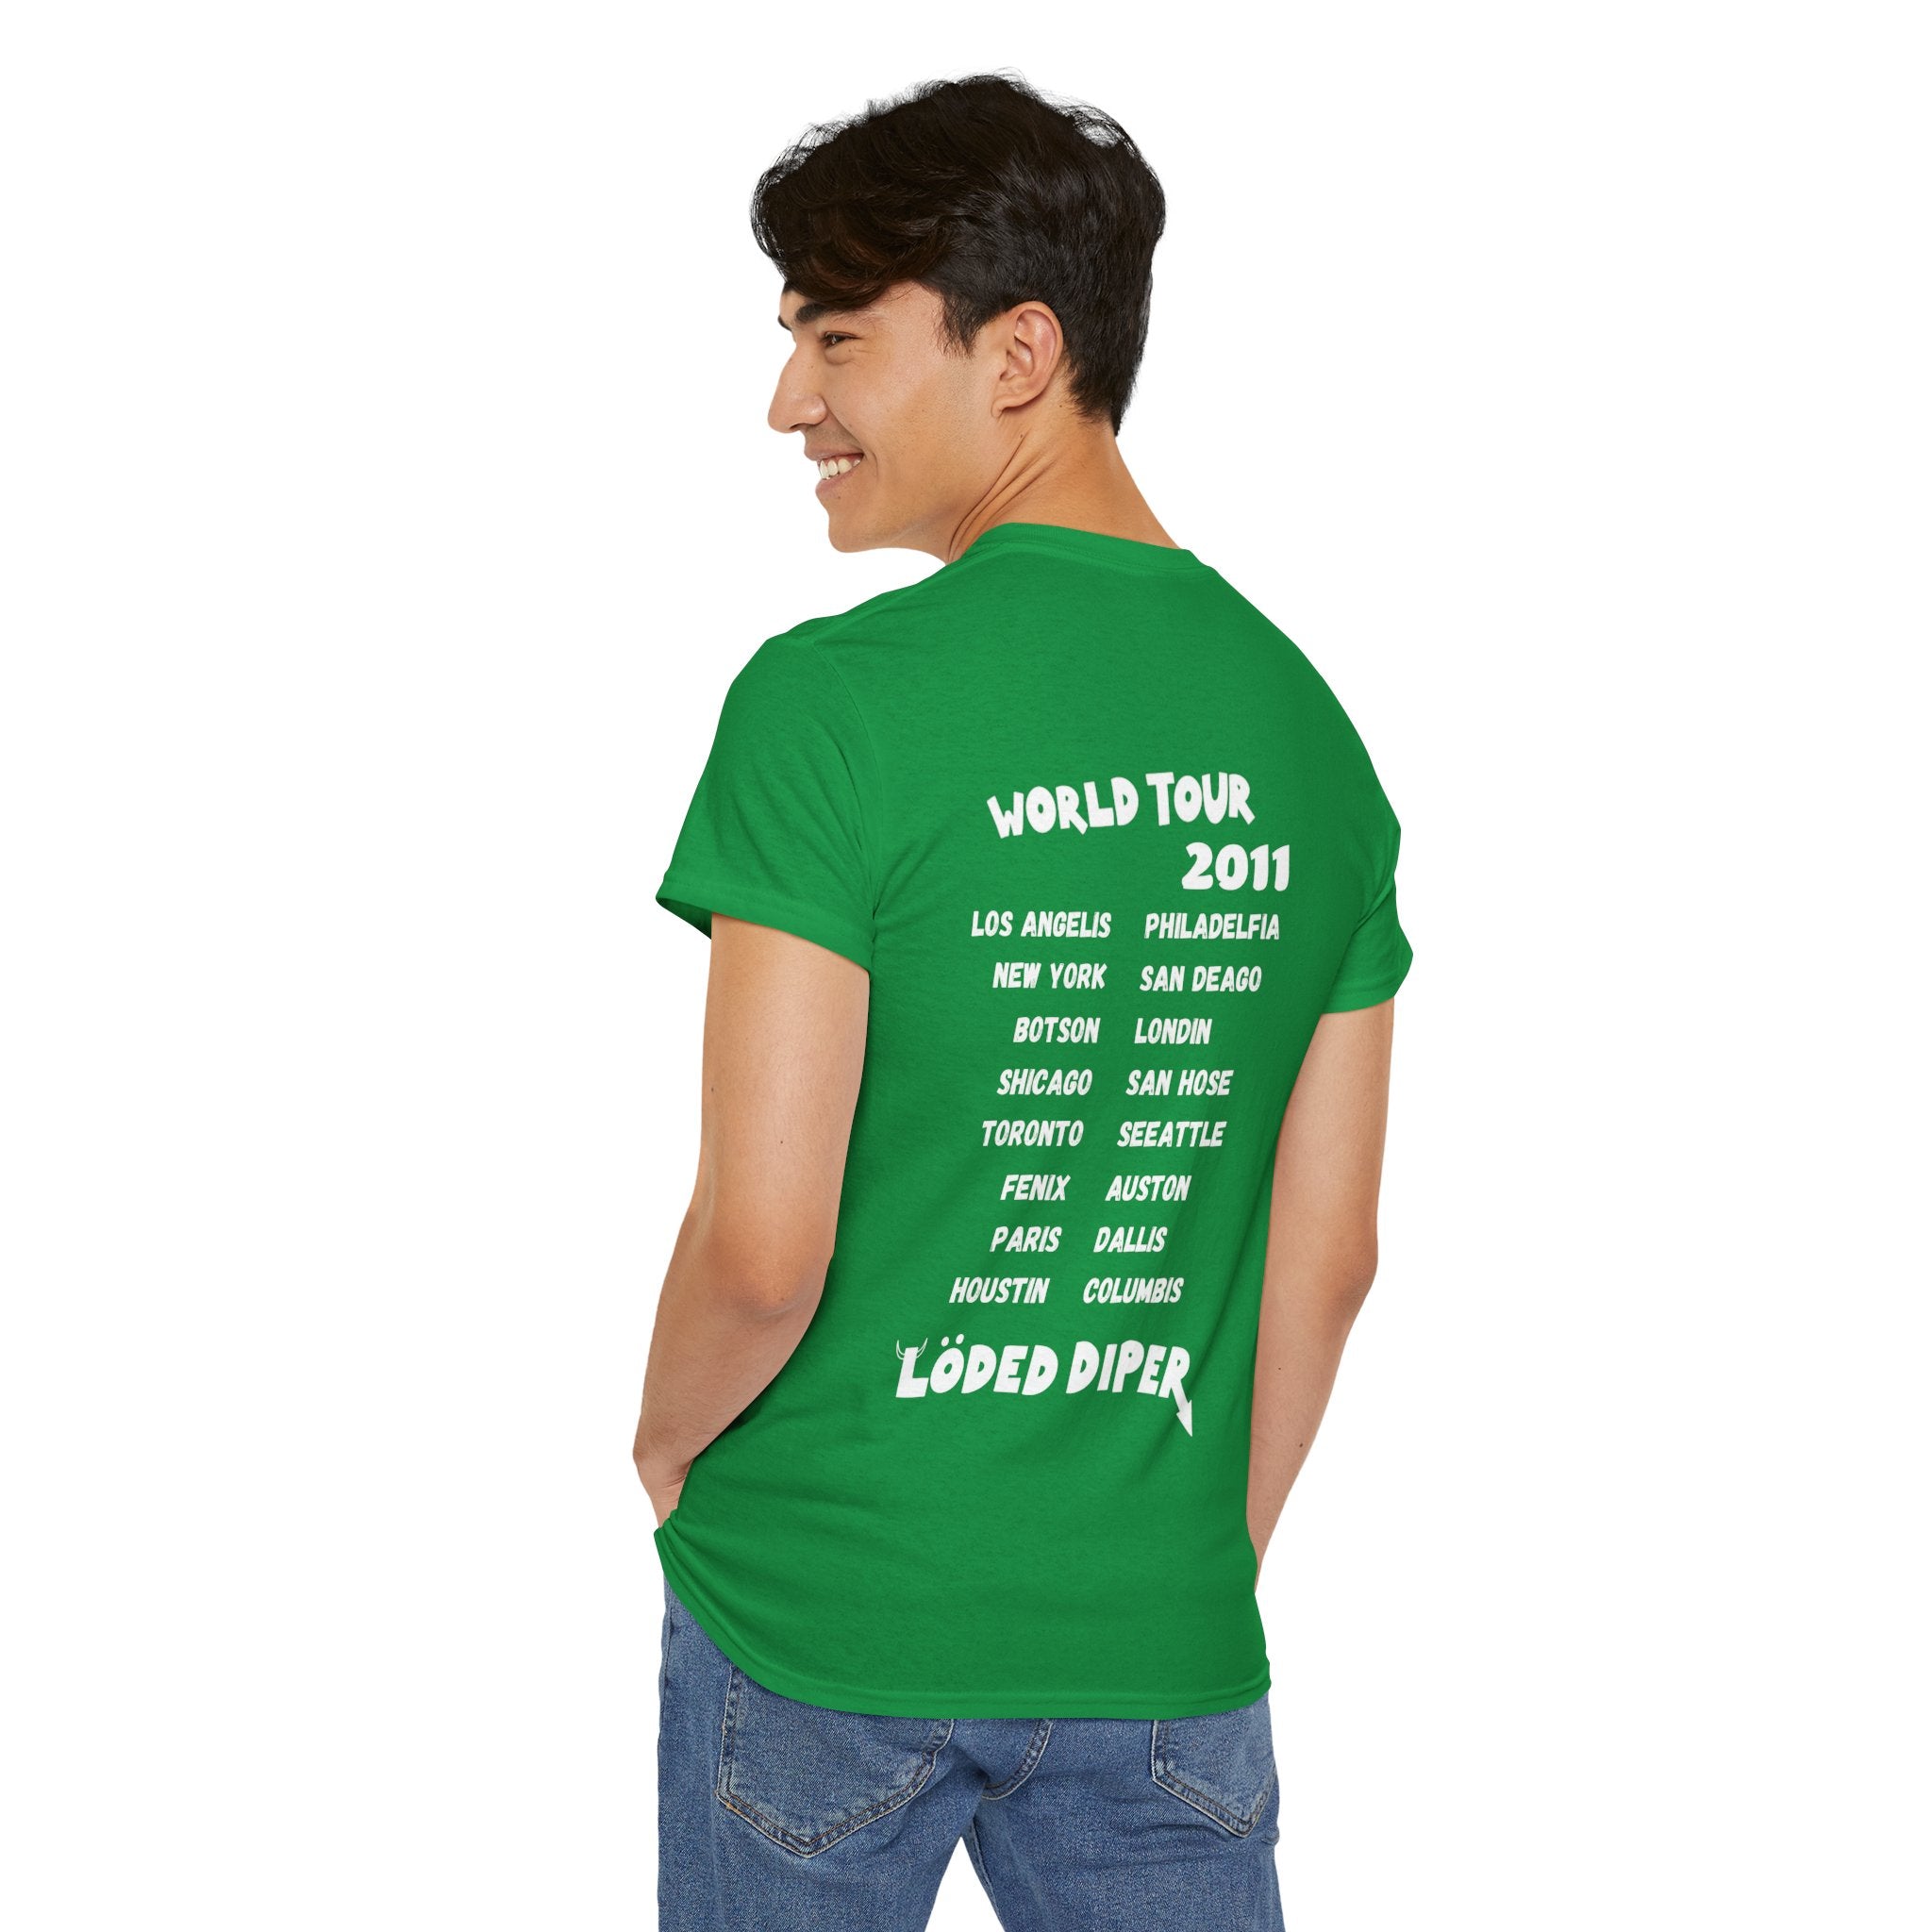 Loded Diper World Tour Shirt (Diary of a Wimpy Kid Rodrick Rules) - Unisex Heavy Cotton Tee